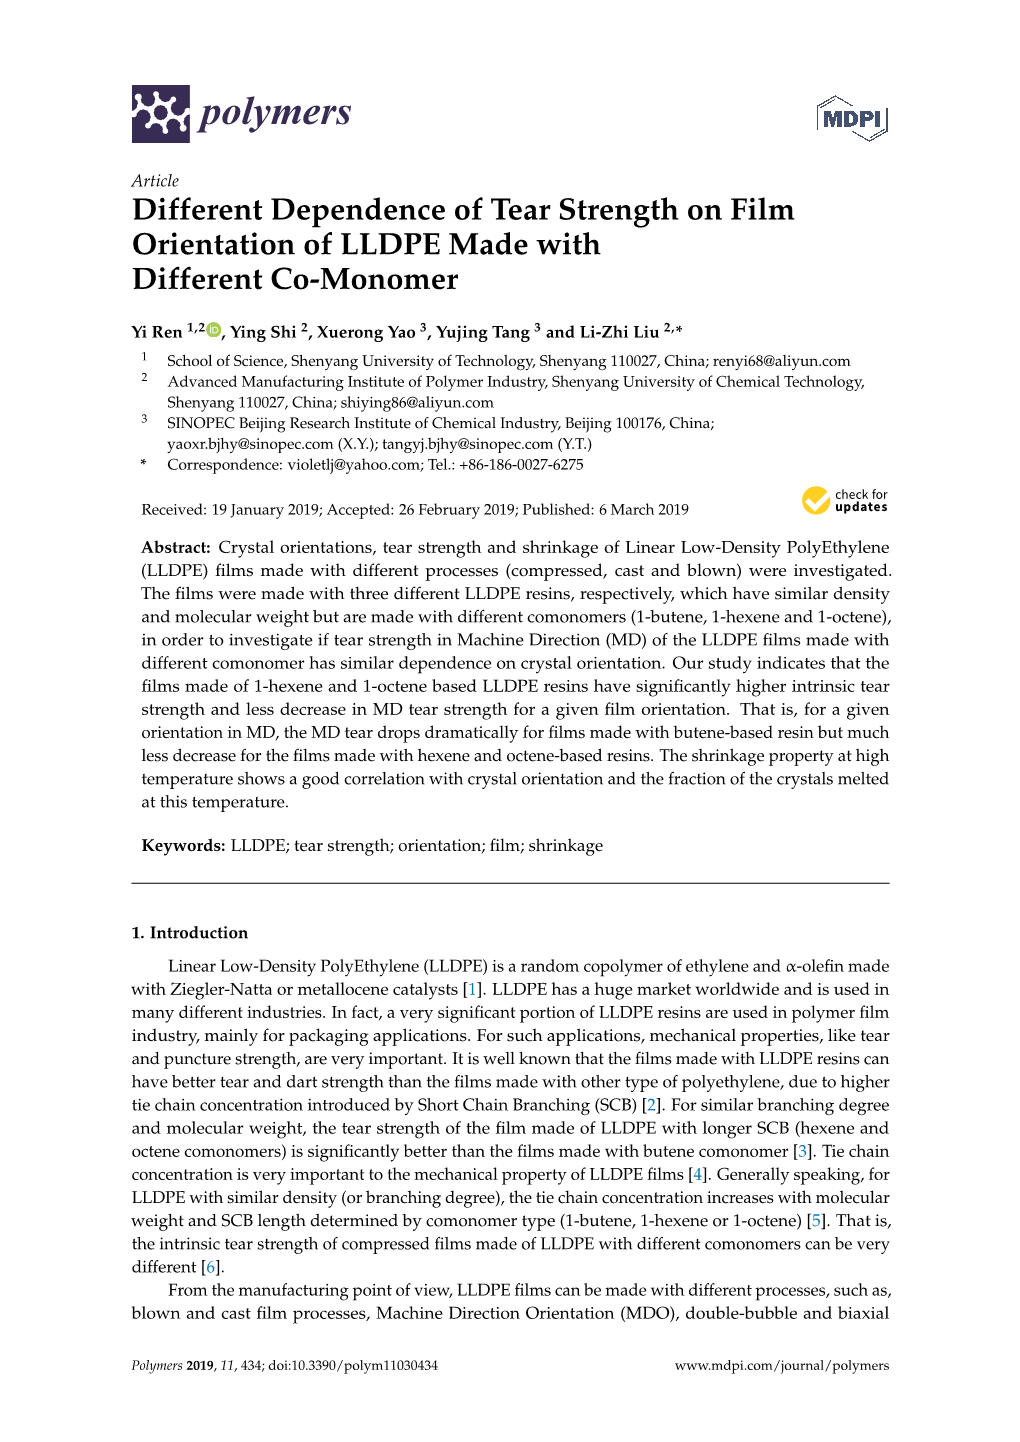 Different Dependence of Tear Strength on Film Orientation of LLDPE Made with Different Co-Monomer